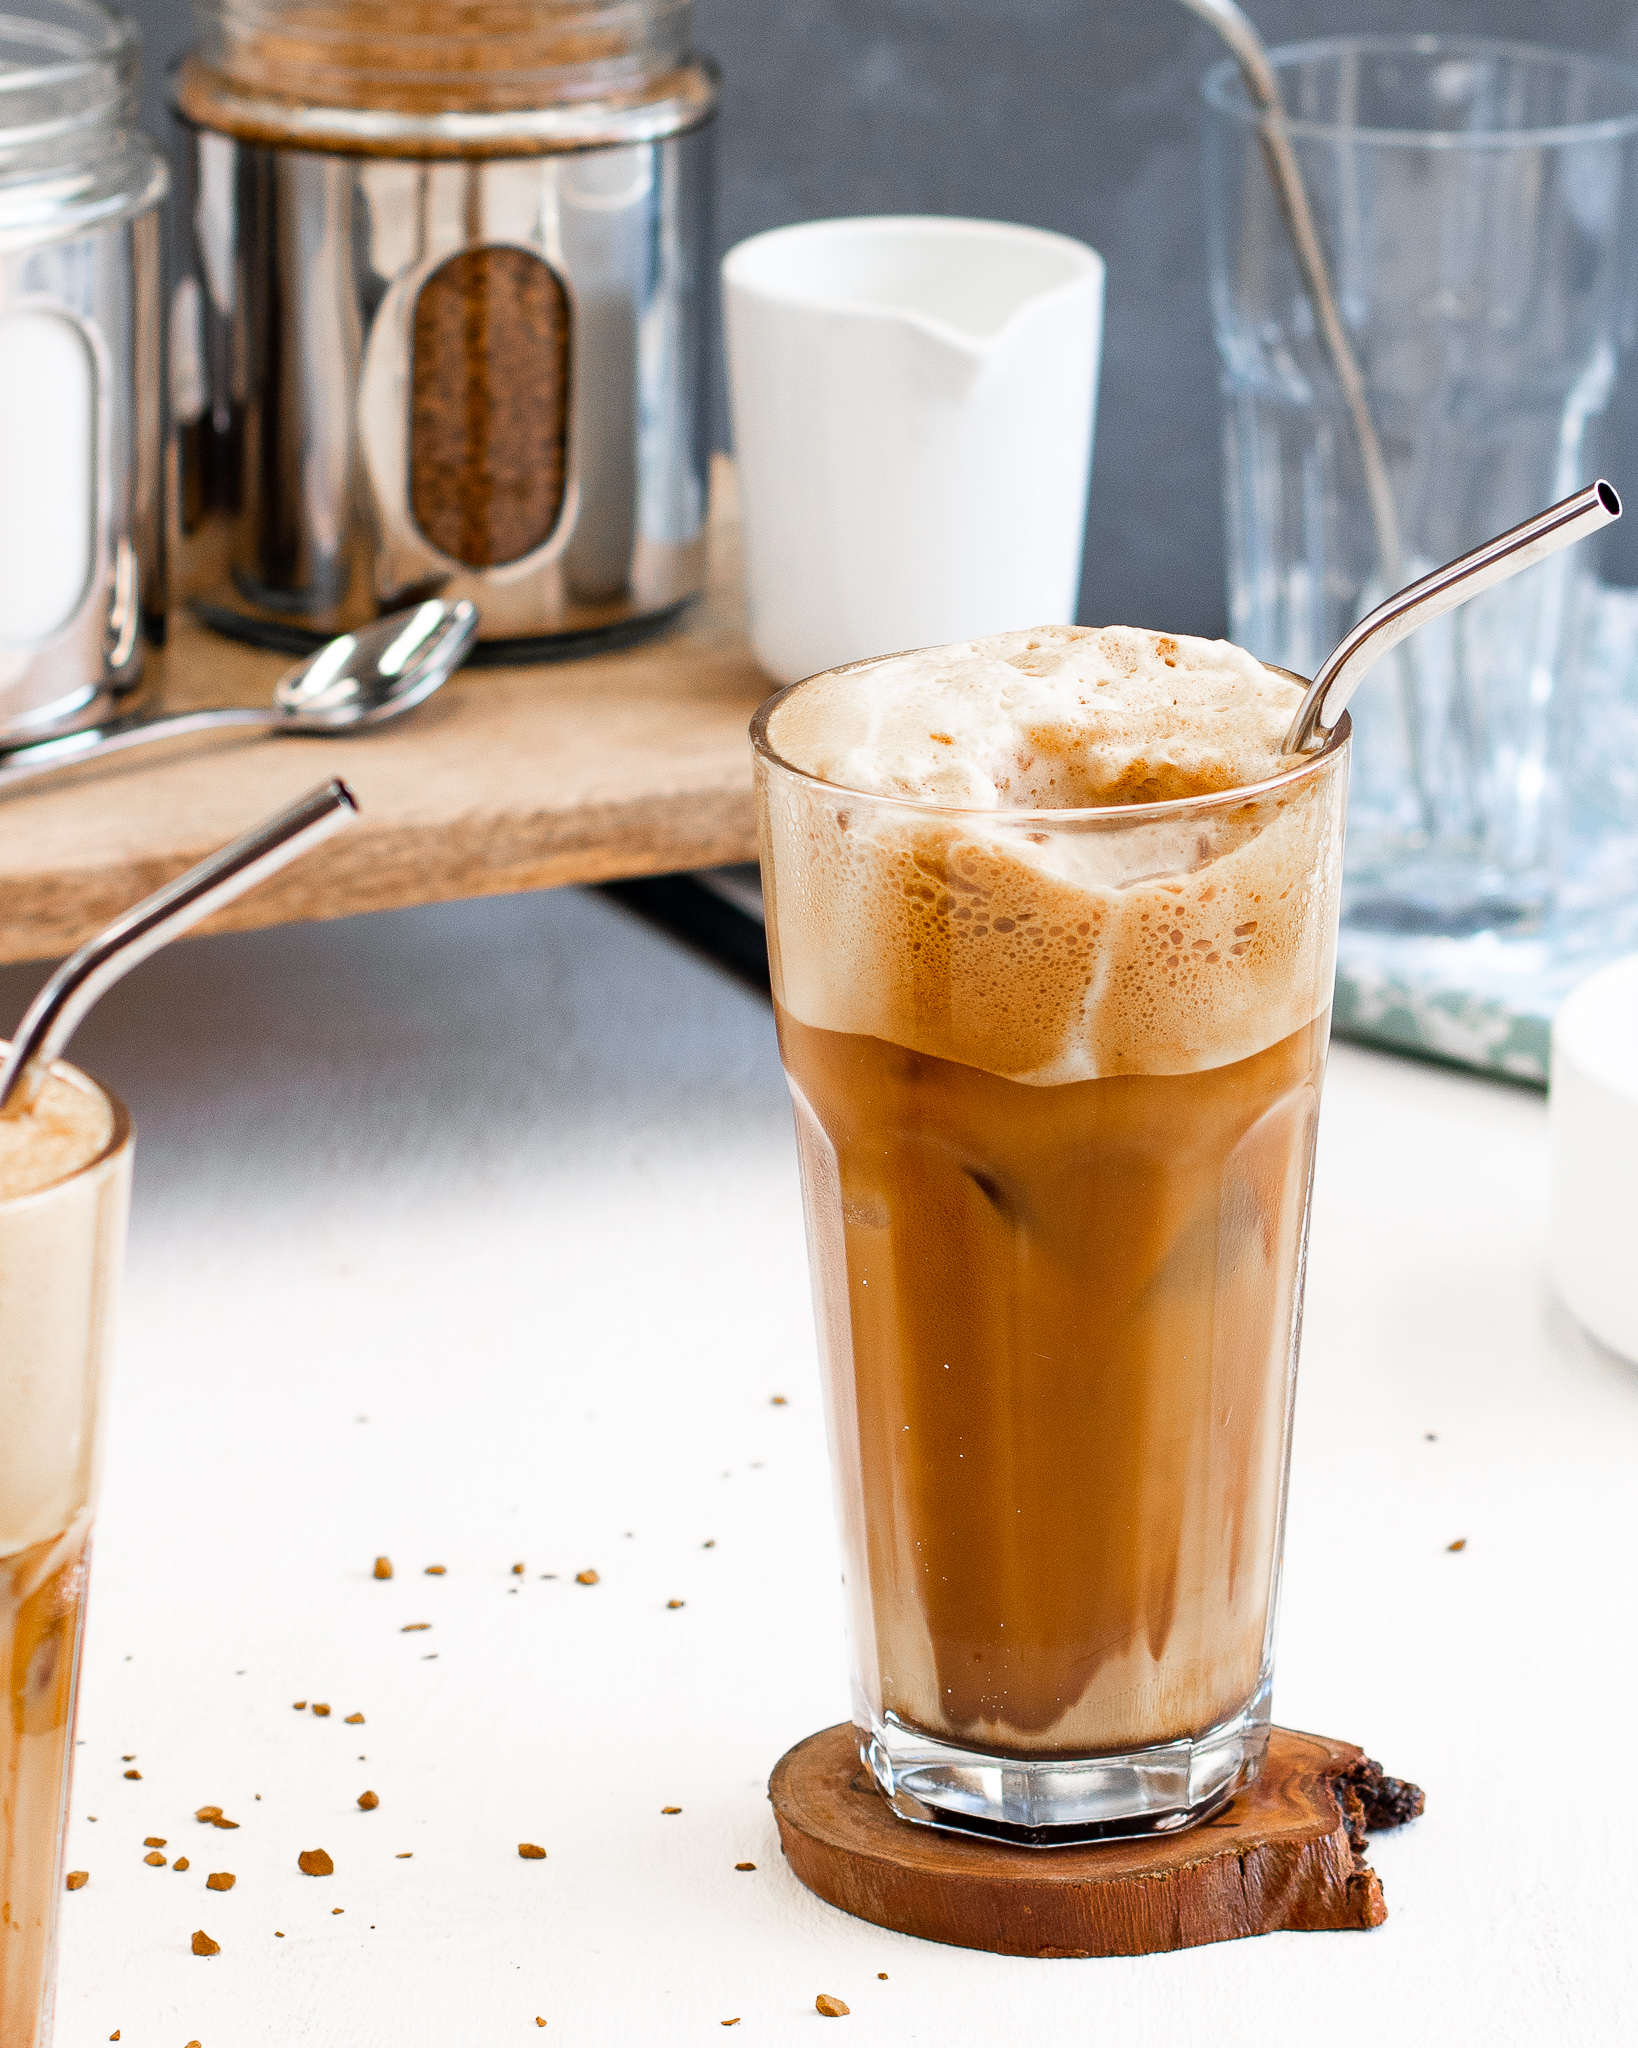 How to make frappe – Greek iced coffee - My Family's Food Diary